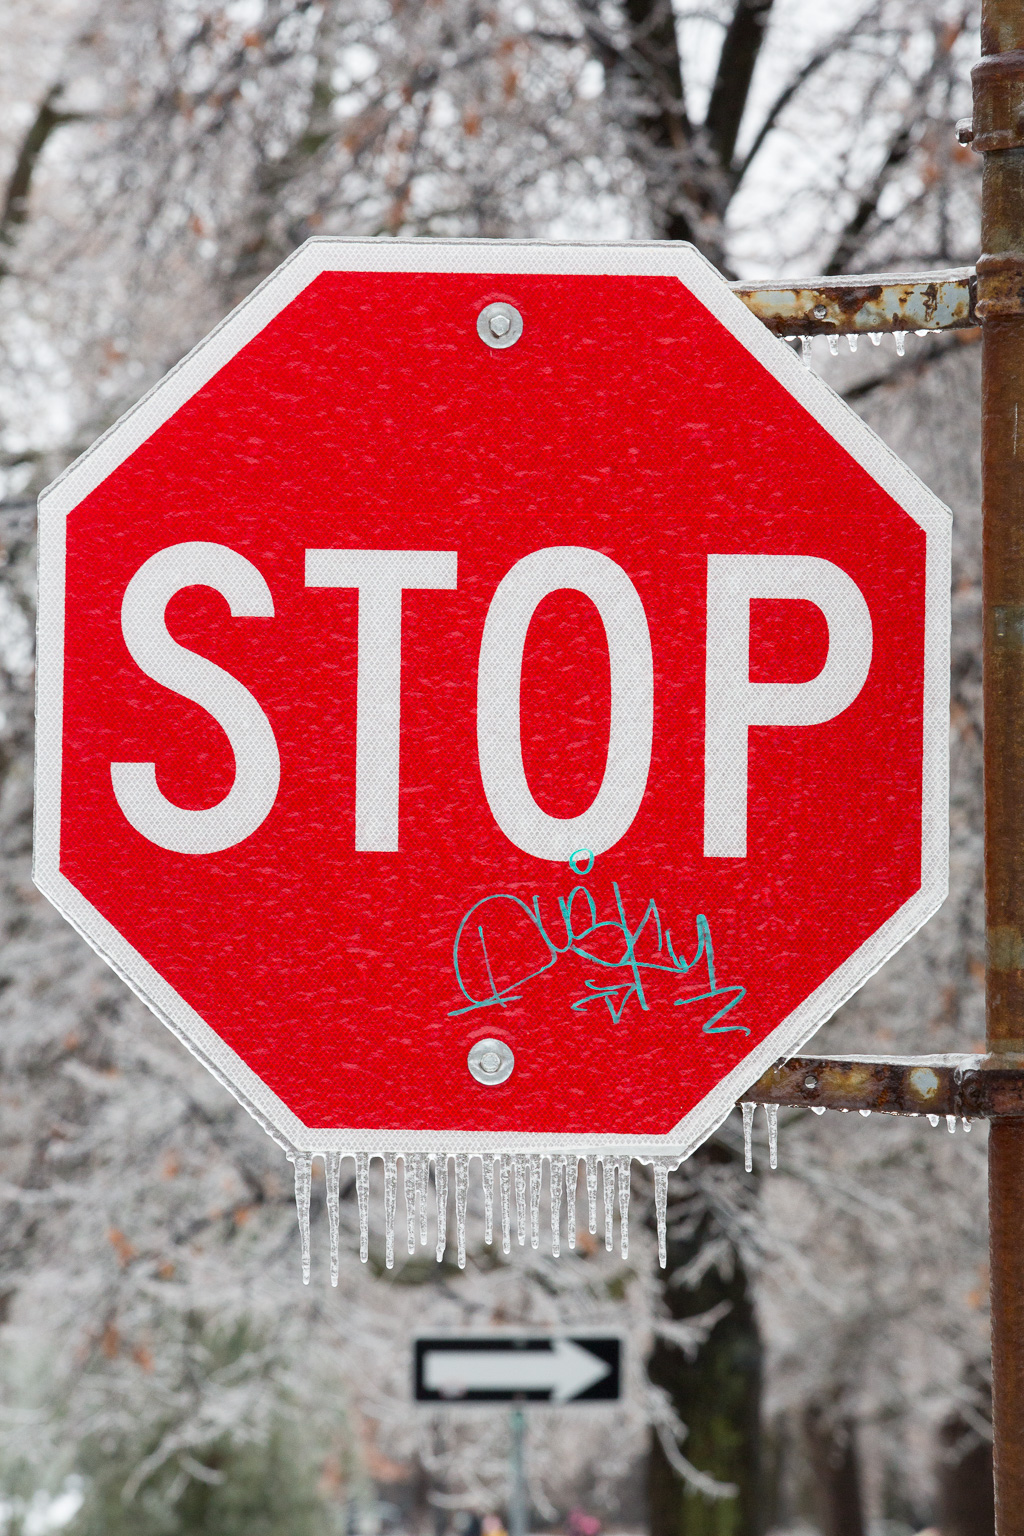 Stop sign in ice storm with icicles dangling from the bottom.